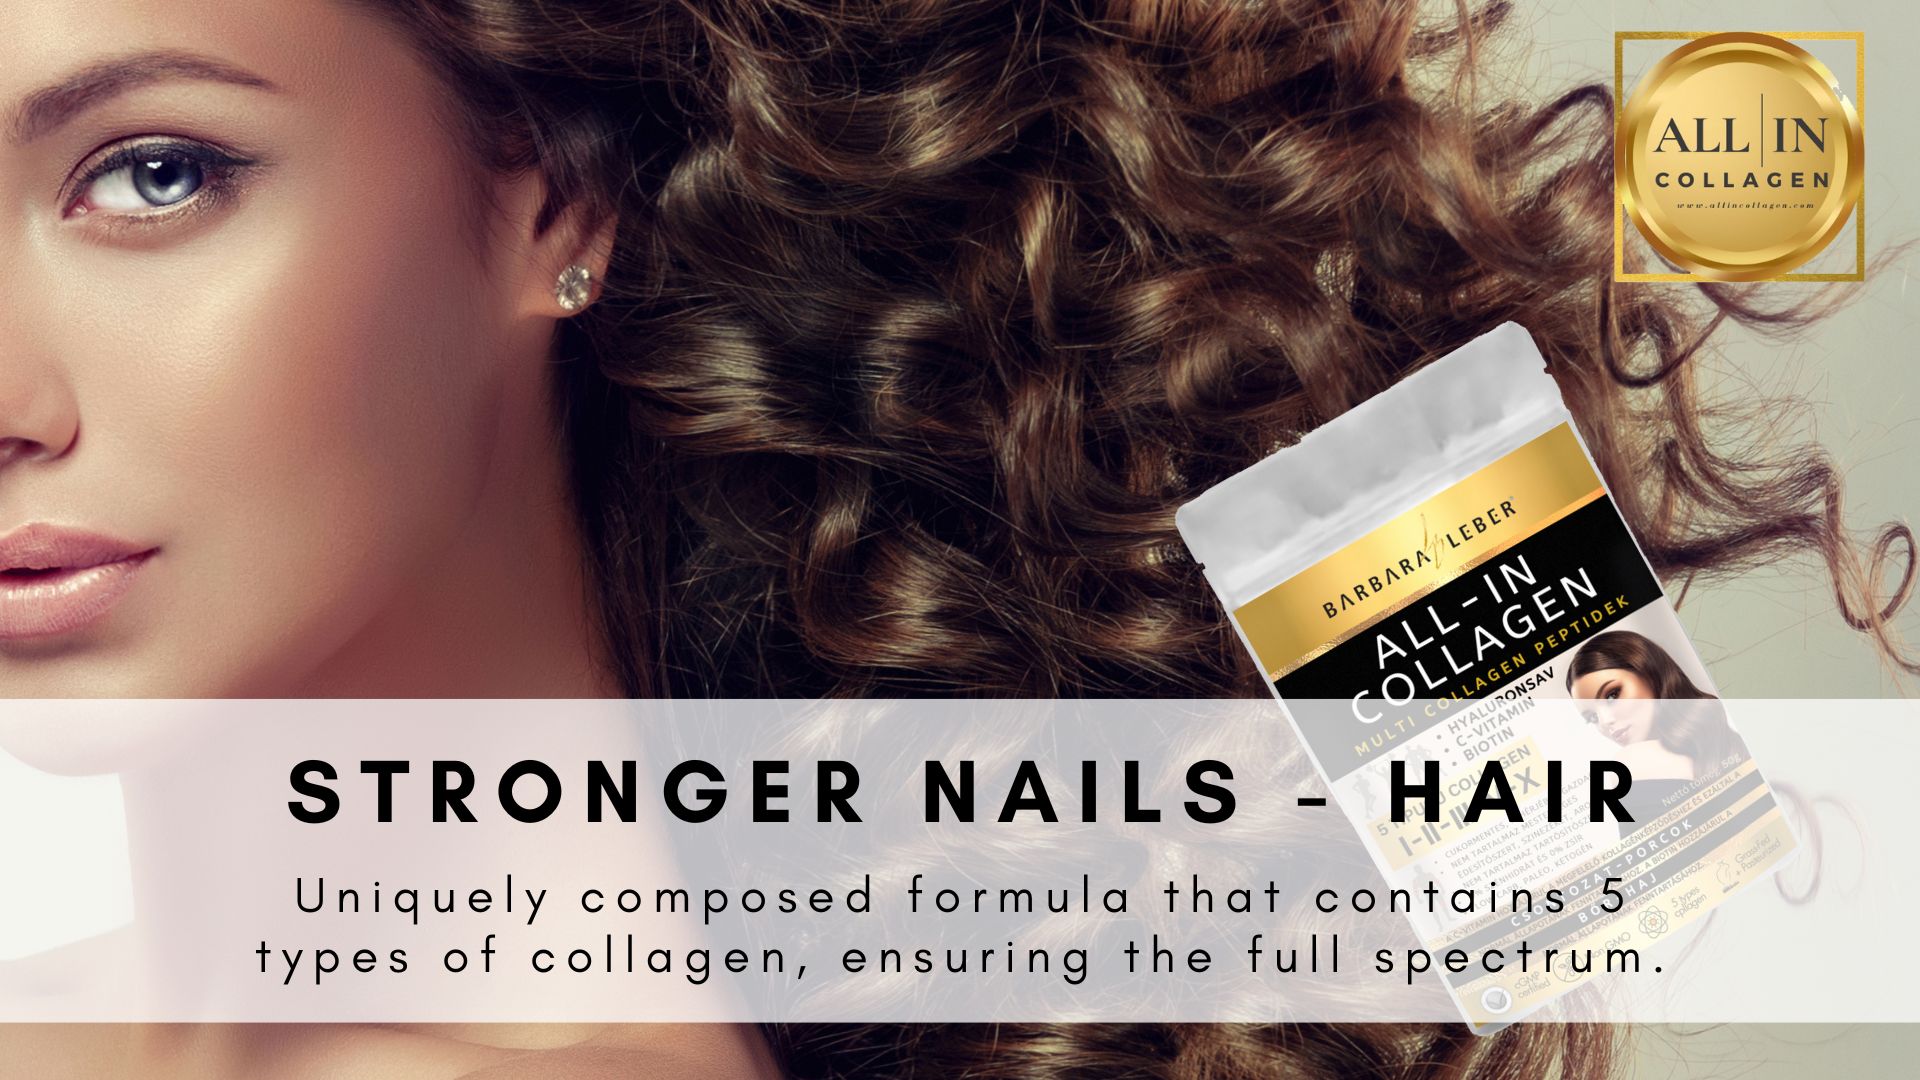 How does multi collagen peptides helps stronger nails and hair?